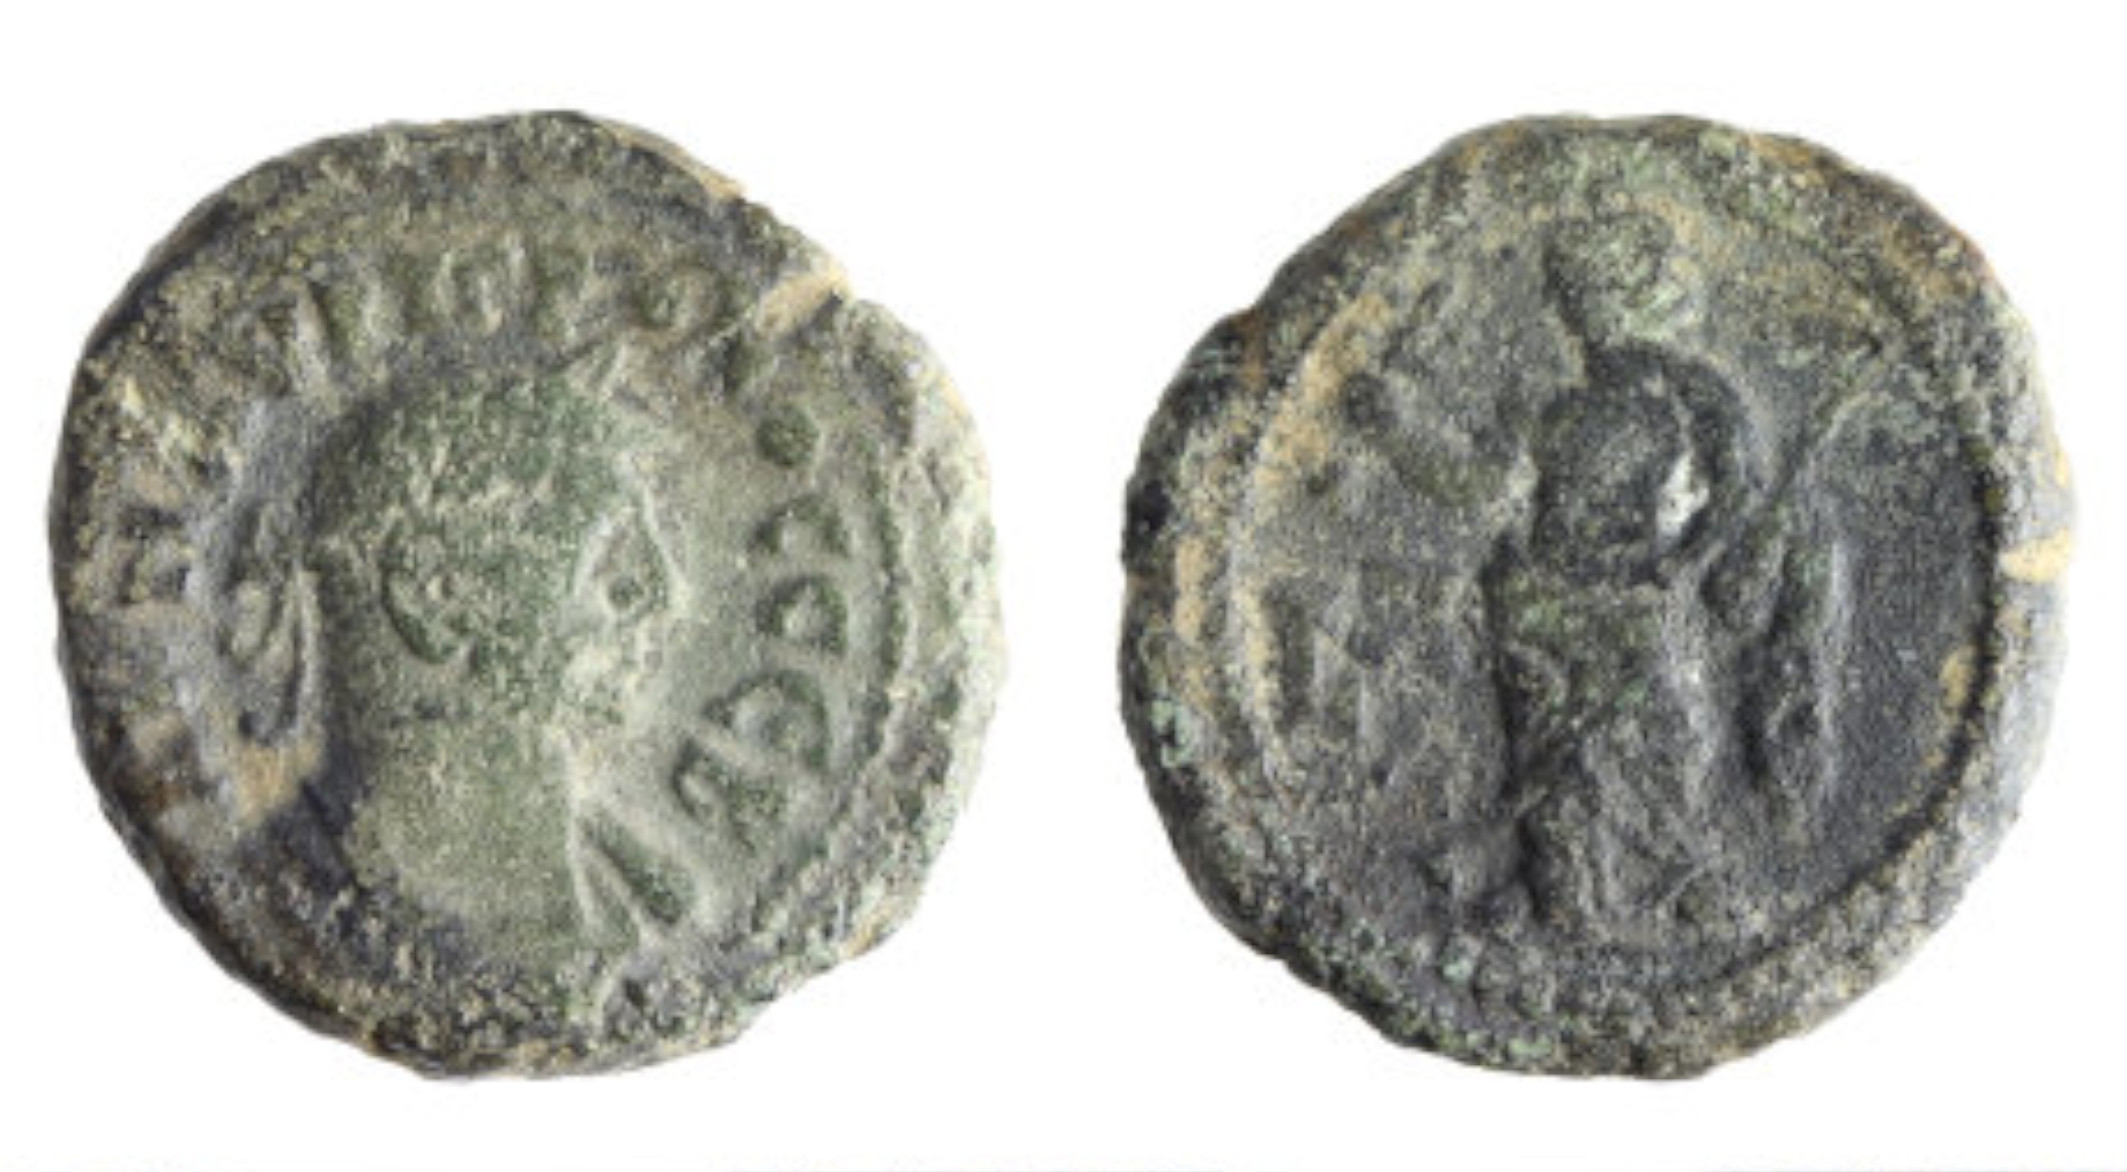 Early Egyptian coins in Northern Europe